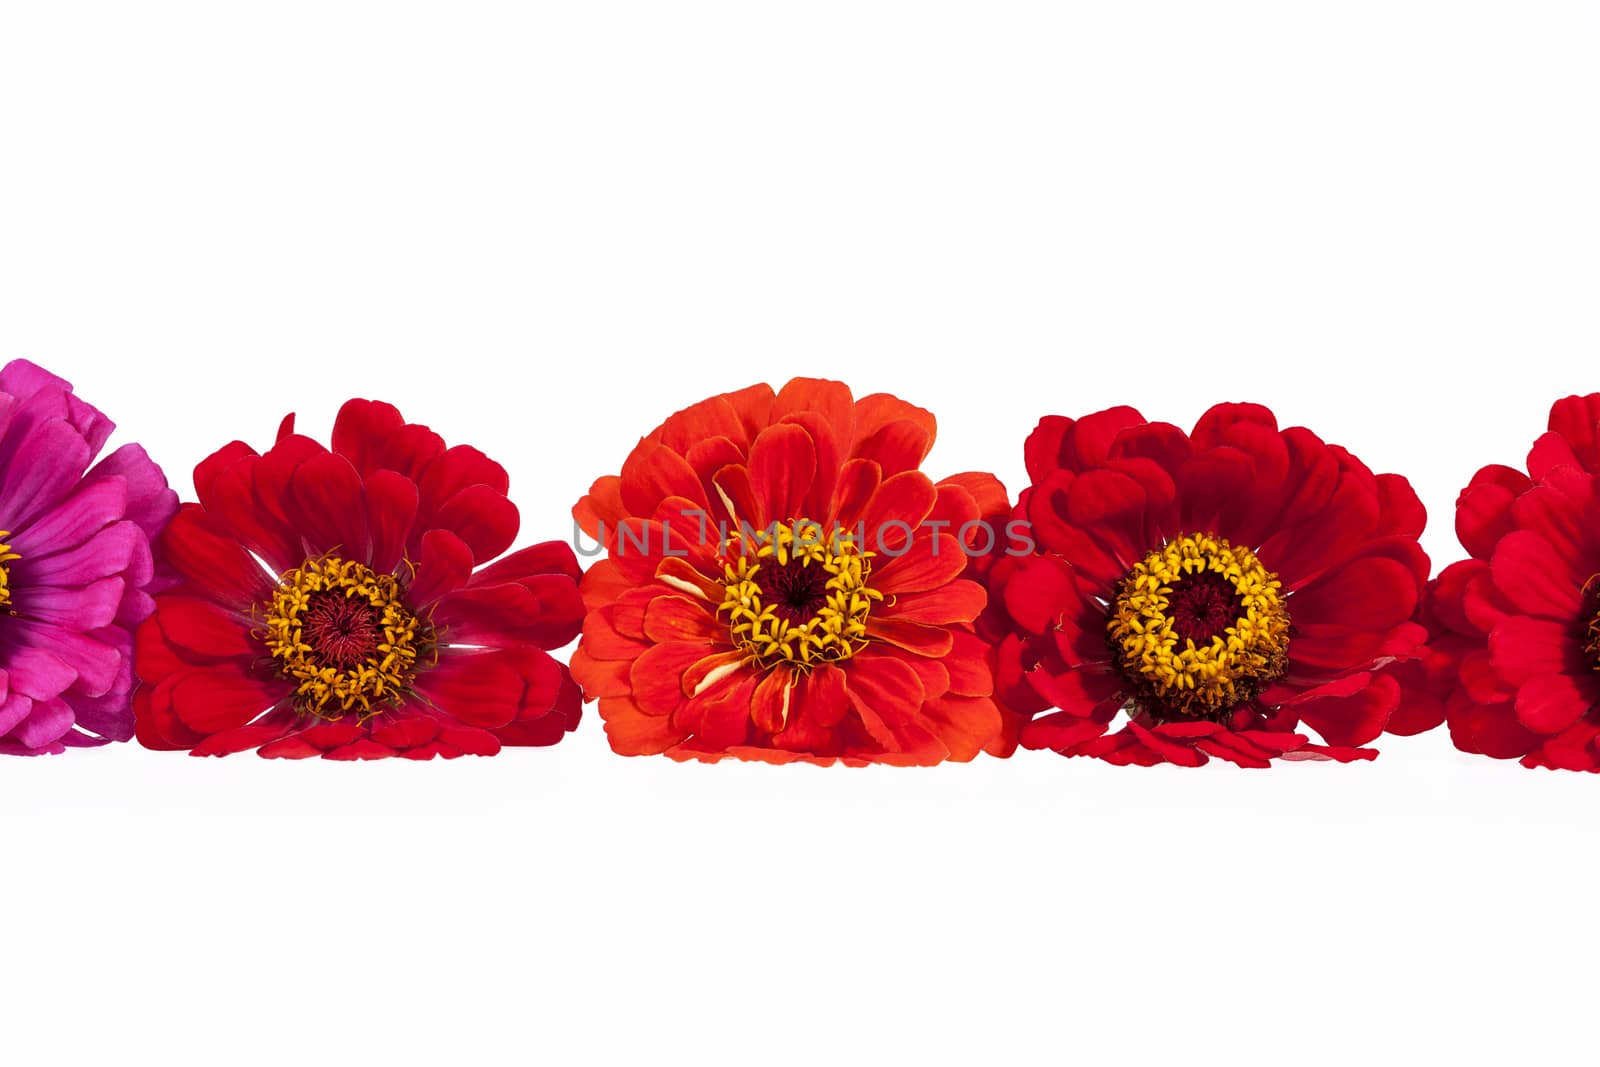 Flowers of red zinnia isolated on white background, place for text